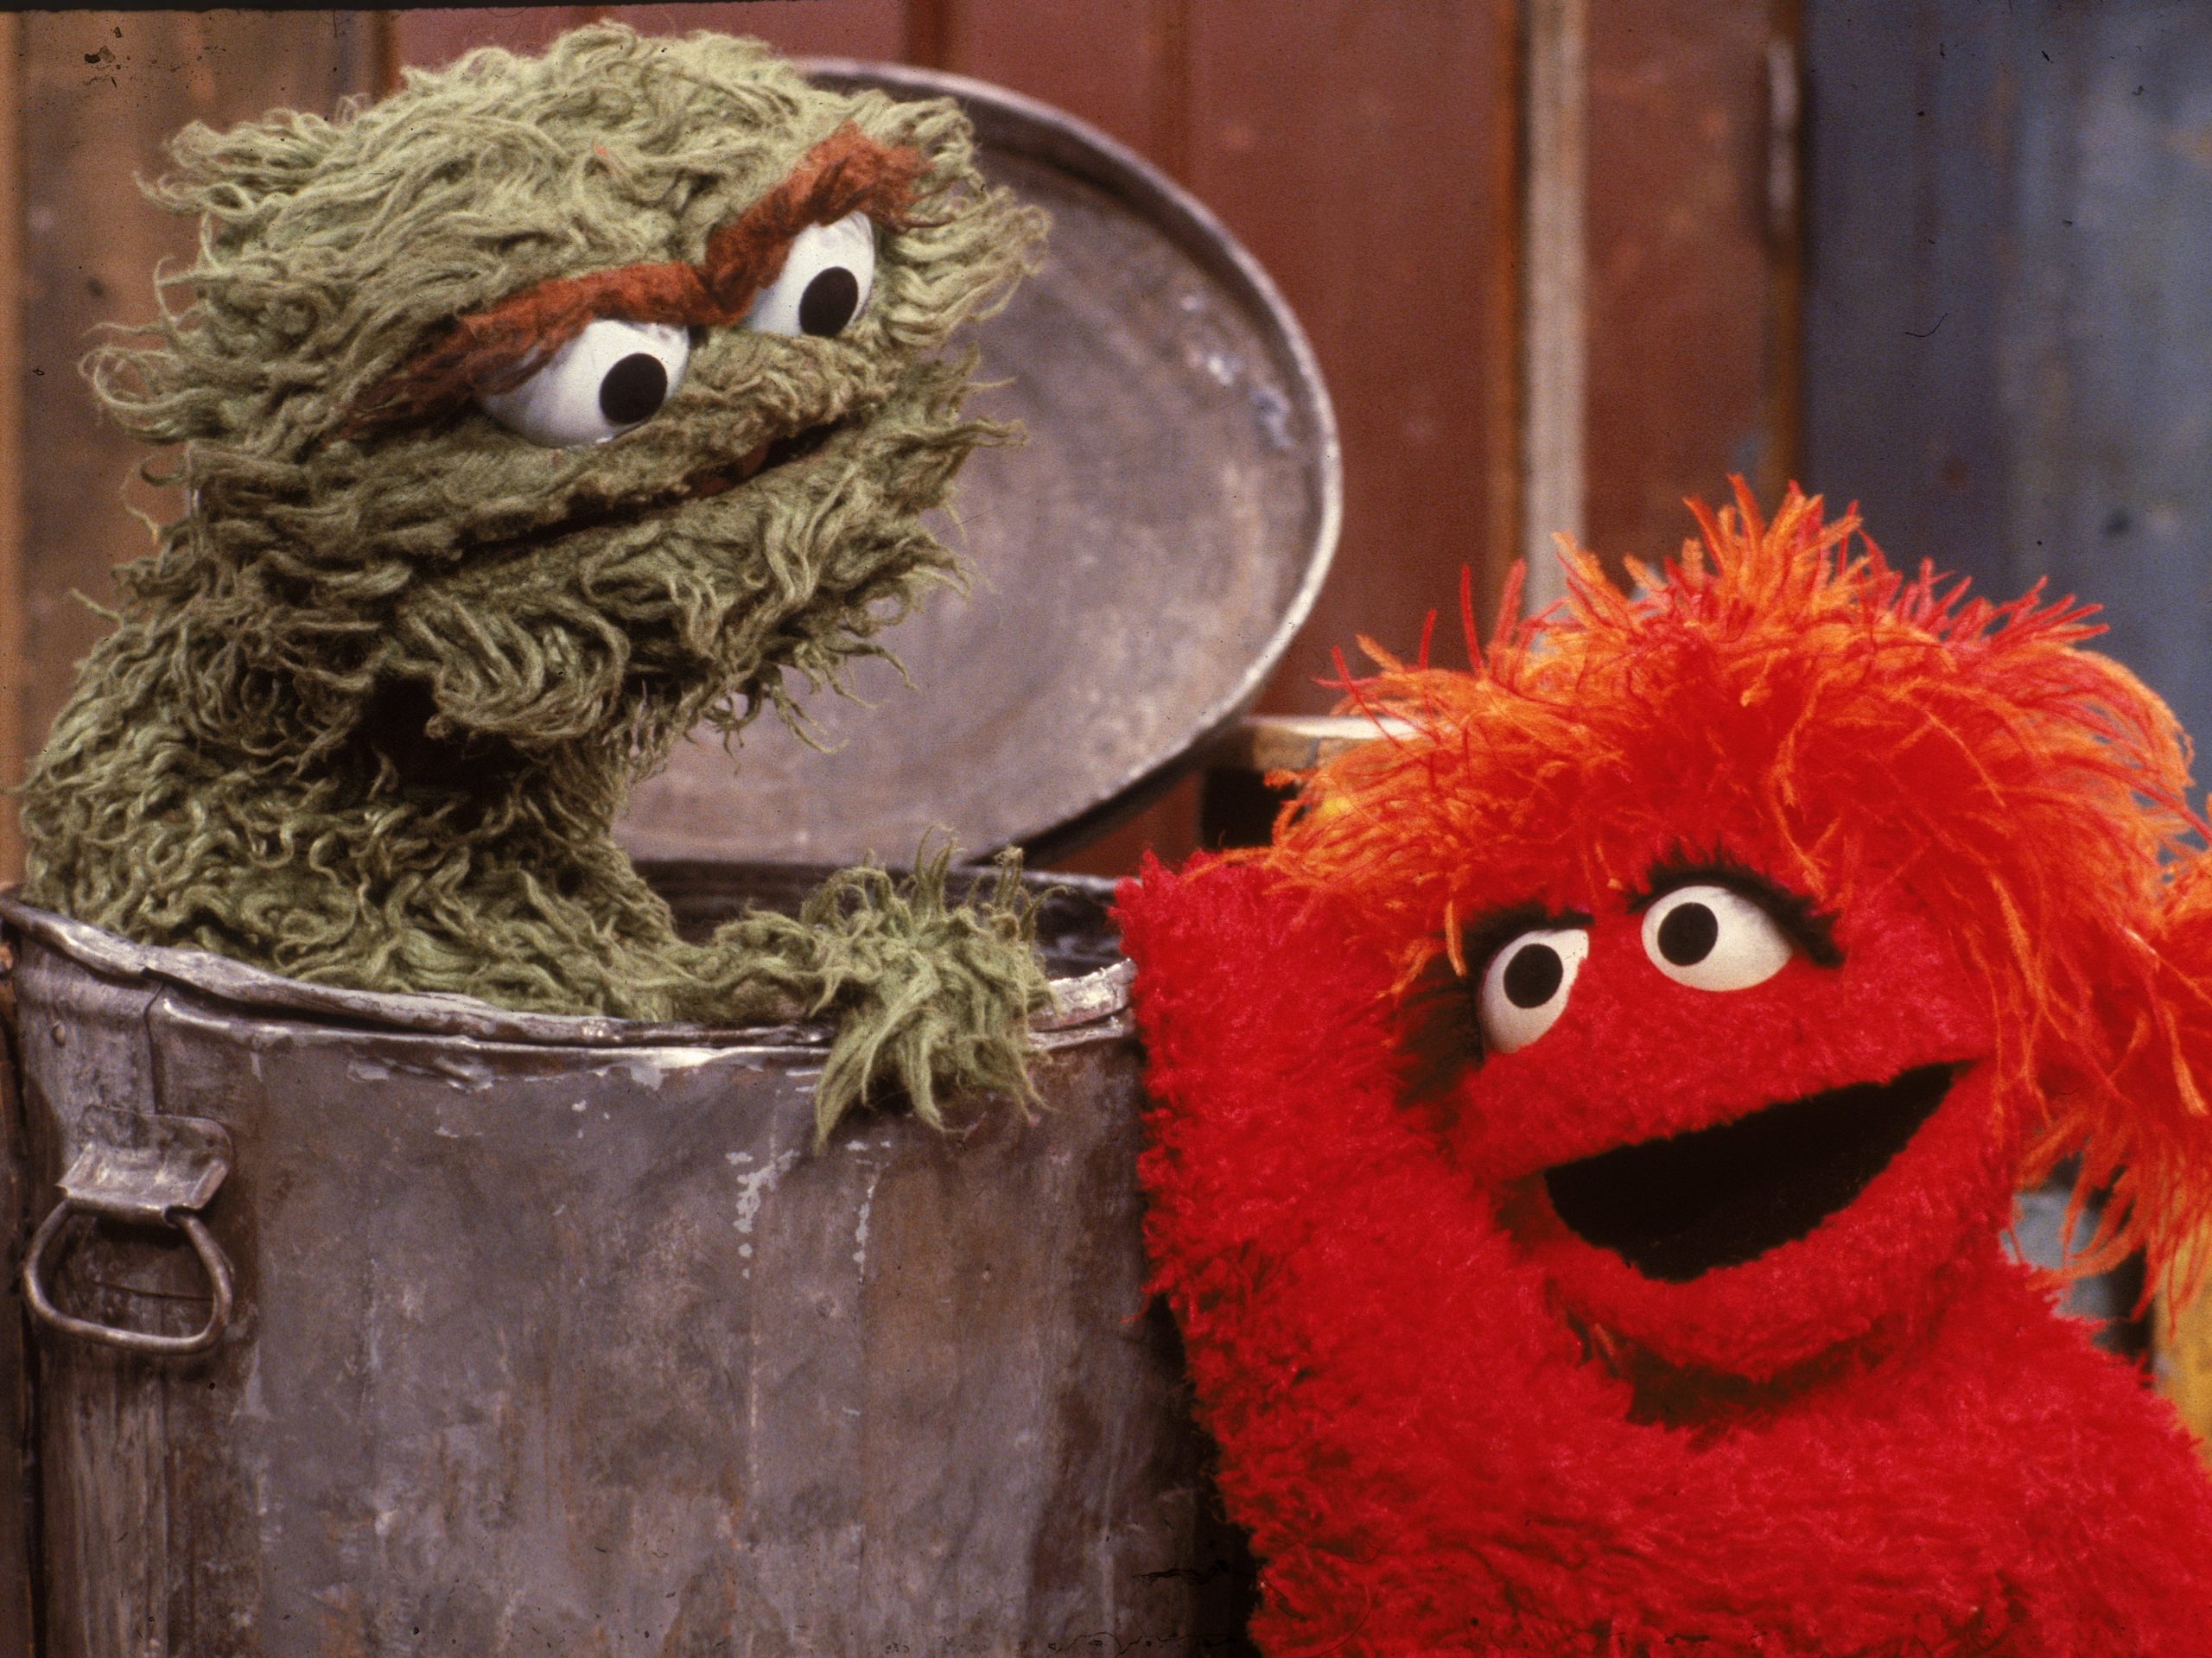 "Sesame Street" first aired in 1969.